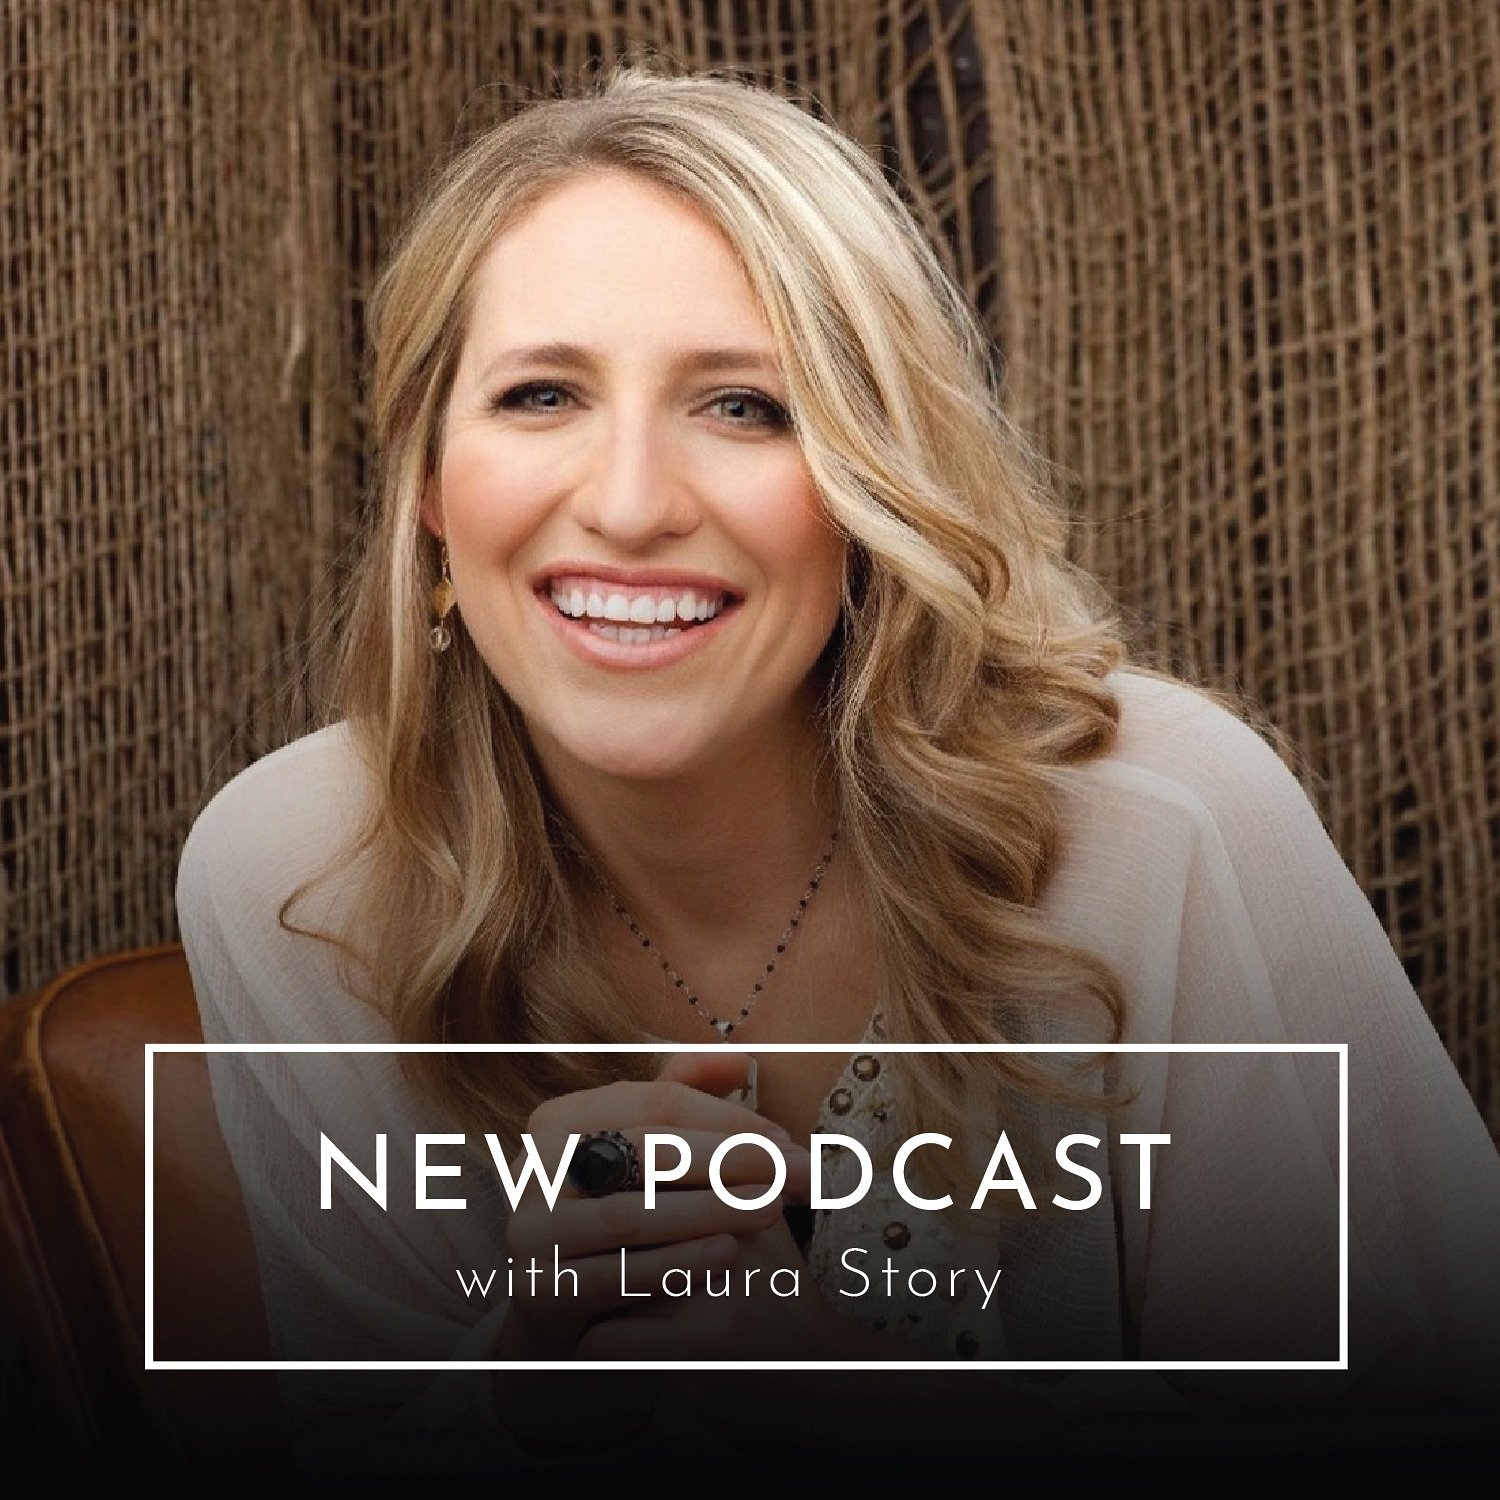 NEW WC PODCAST // Laura Story

In this podcast, we sit down with our sister and Worship Circle mentor, Laura Story, to talk about her new version of &ldquo;Indescribable&rdquo; from the Worship Circle &ldquo;Foundations&rdquo; project. We also discus